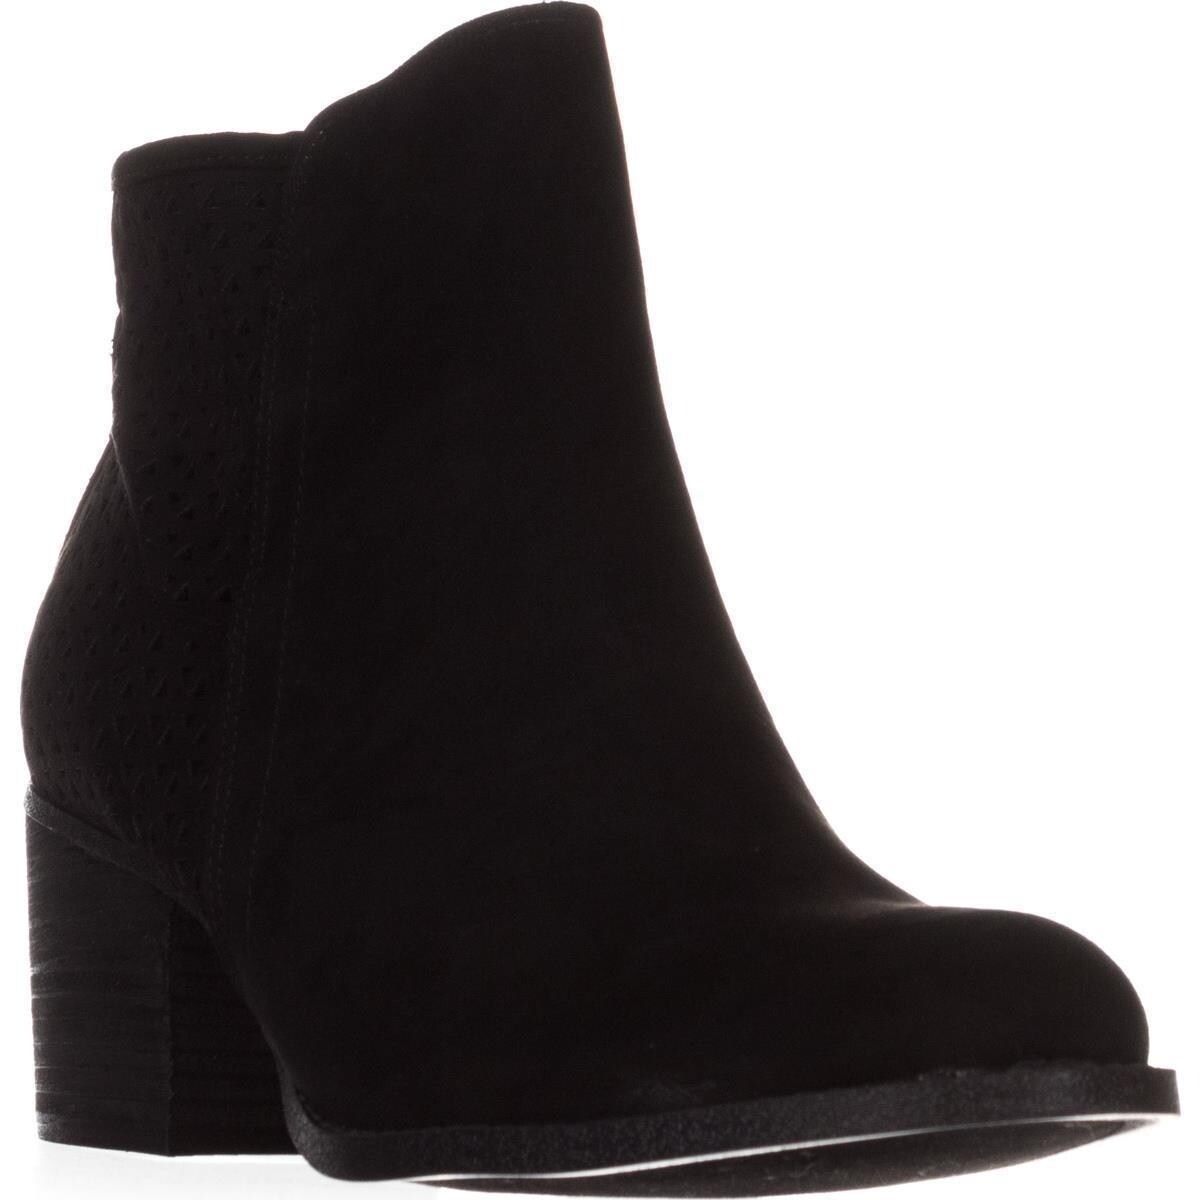 Shop madden girl Fayth Ankle Boots 